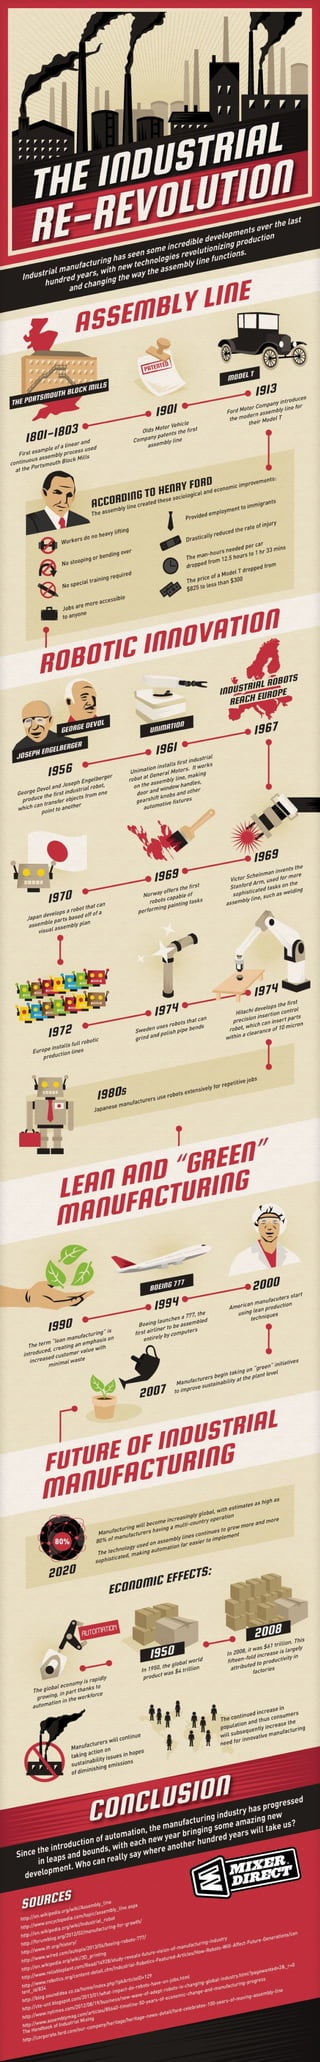 Industrial Re-revolution [Infographic]